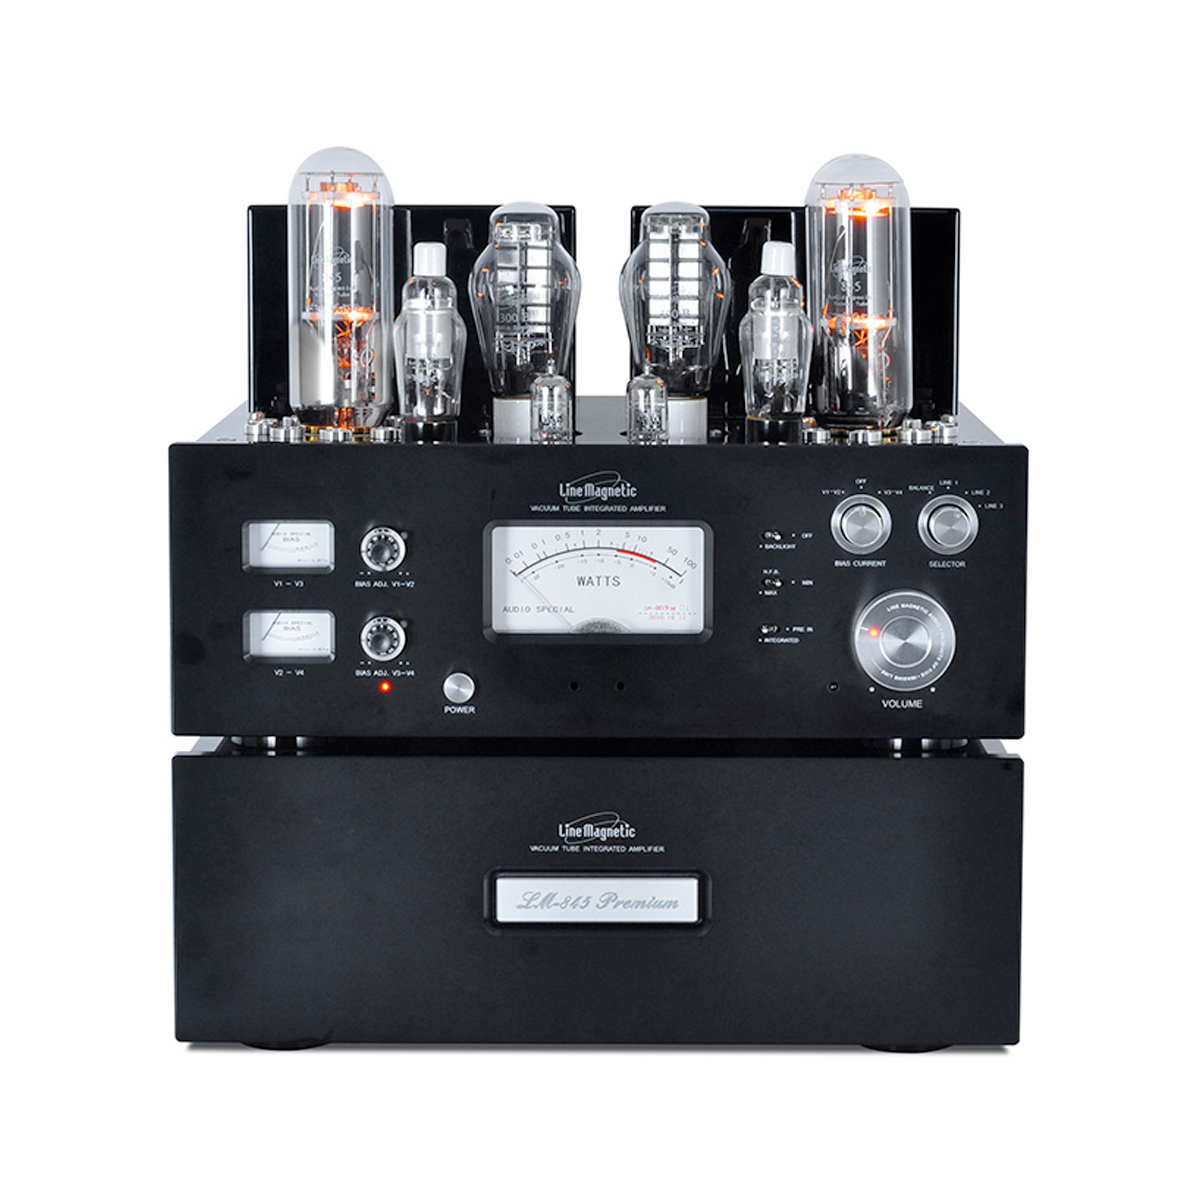 Line Magnetic LM-845 Integrated Amplifier - Excel Audio